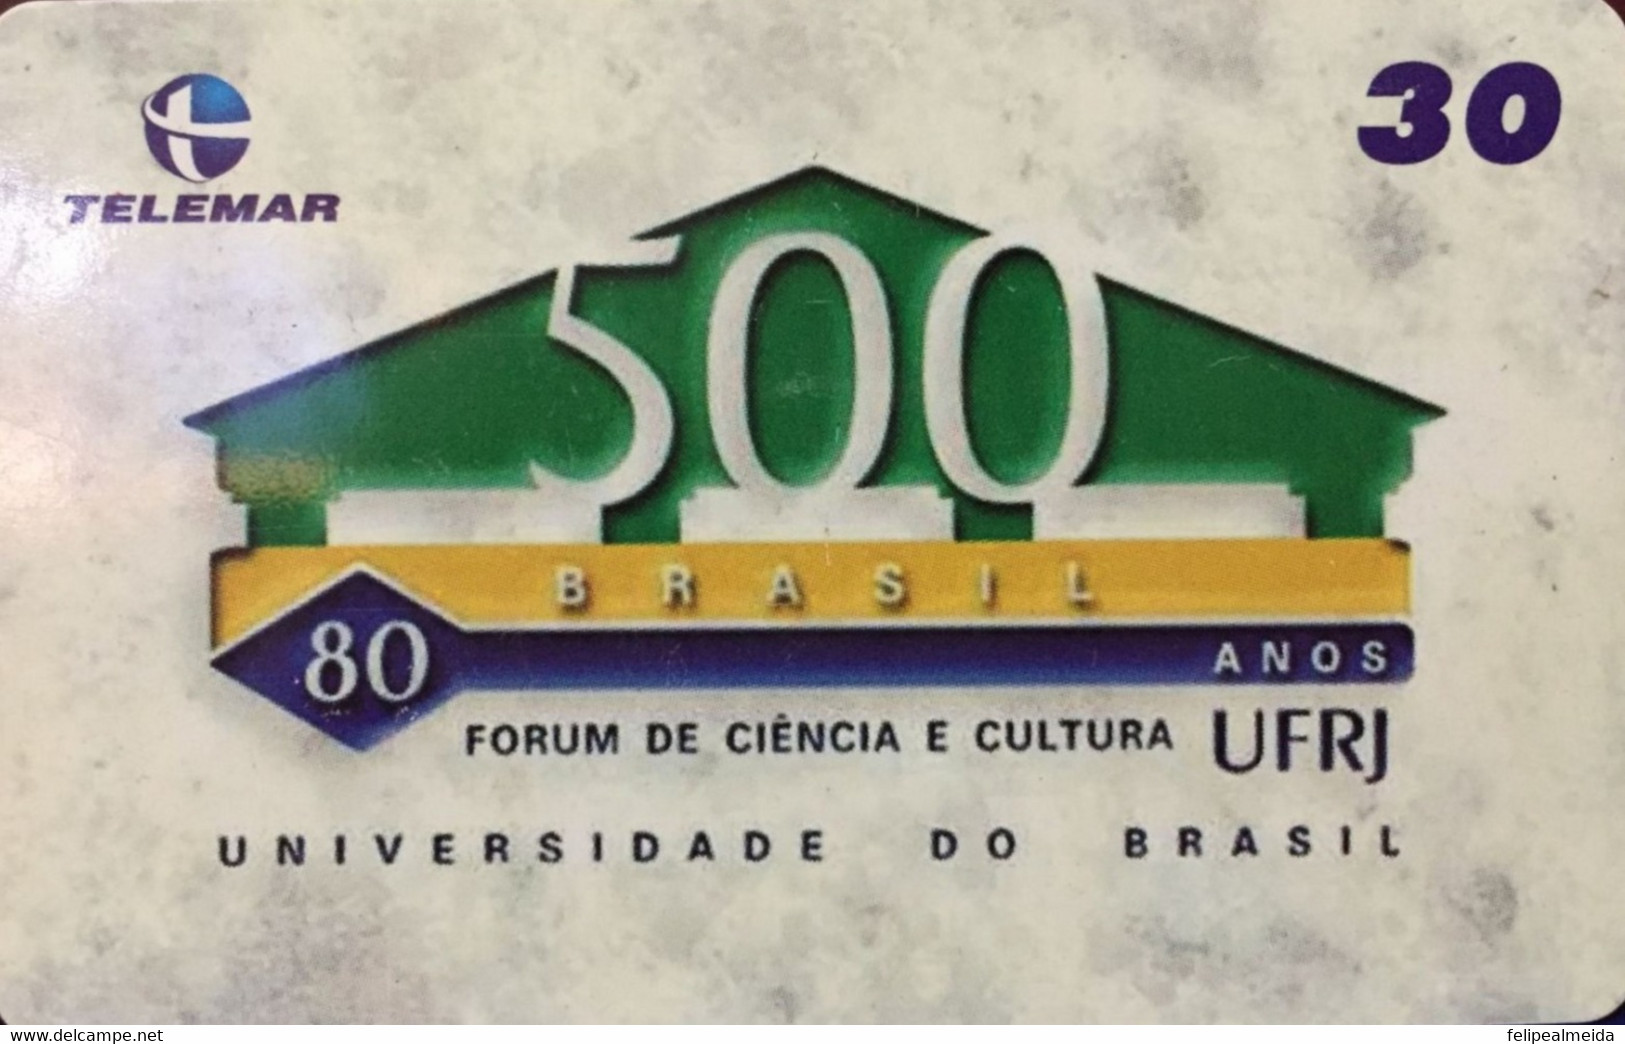 Phone Card Manufactured By Telemar In 2000 - 500 Years Of Brazil - Permanent Seminar - Science And Culture Forum - Feder - Kultur